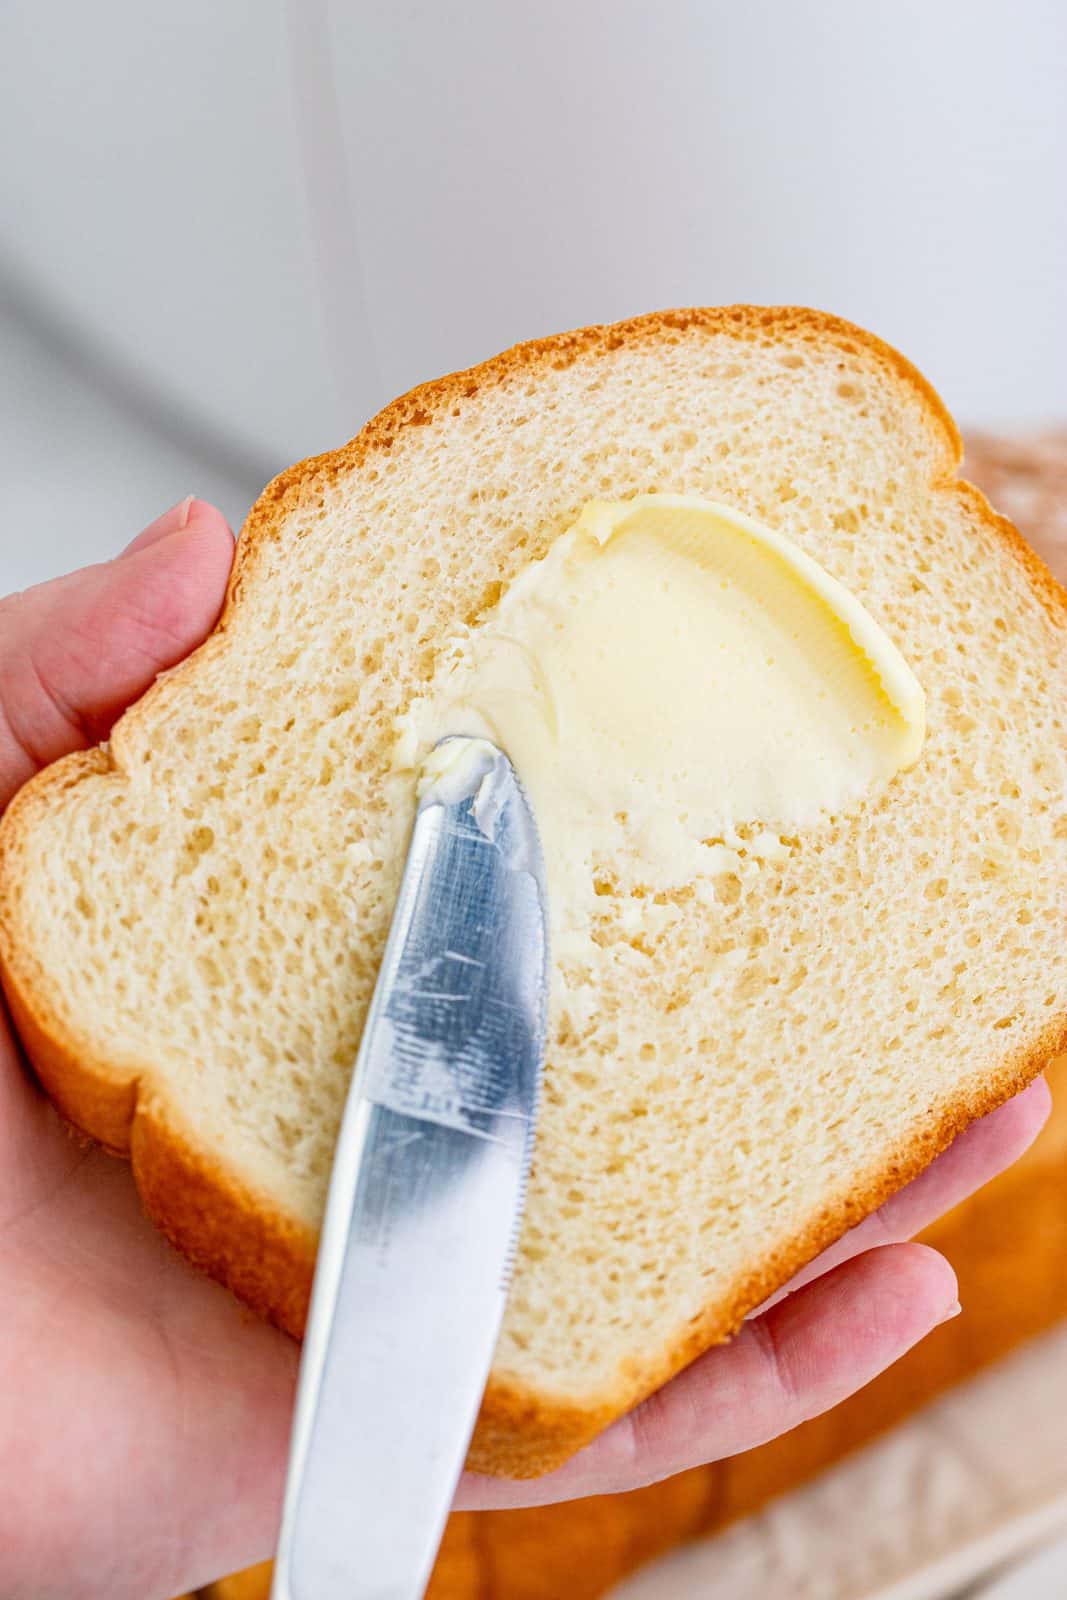 Butter being put on one slice of bread.